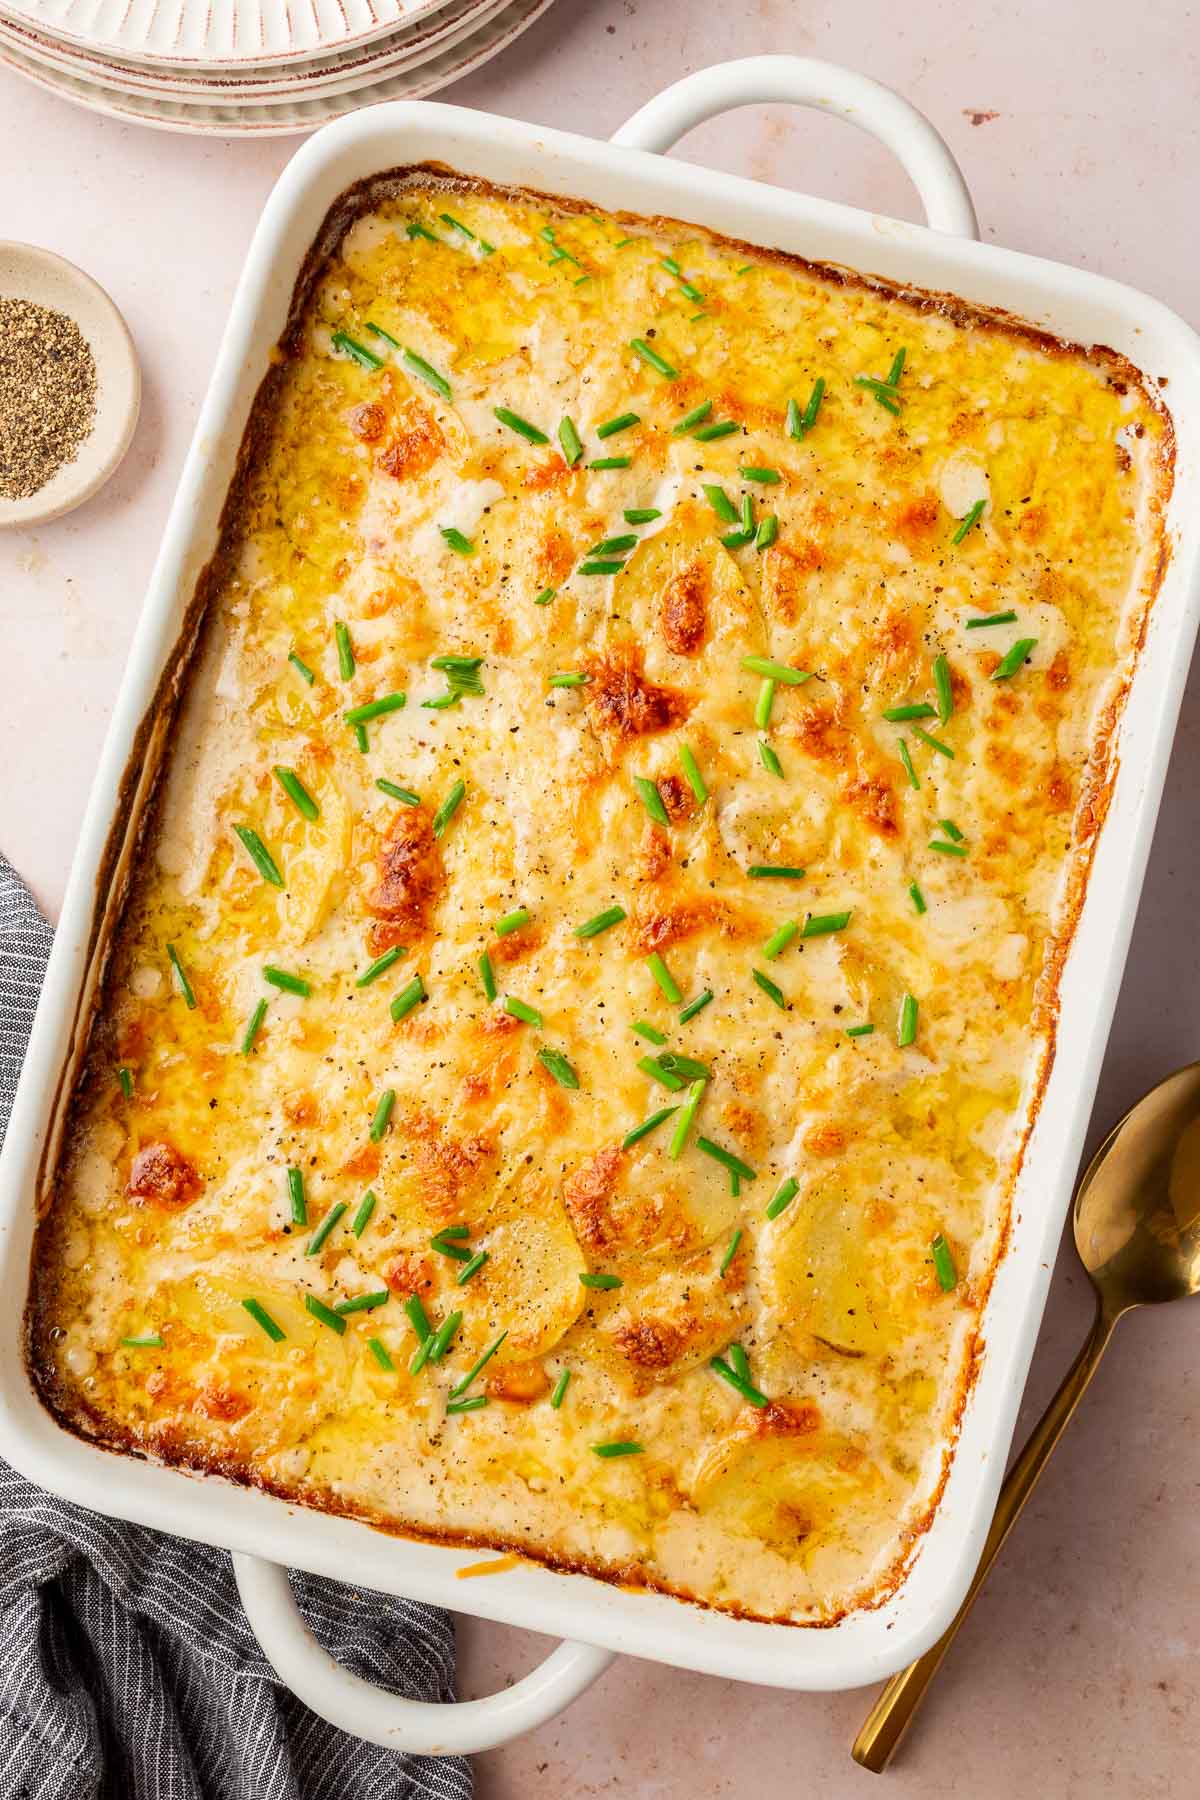 A white rectangle baking dish with baked gluten-free scalloped potatoes from the oven with freshly chopped chives on top.